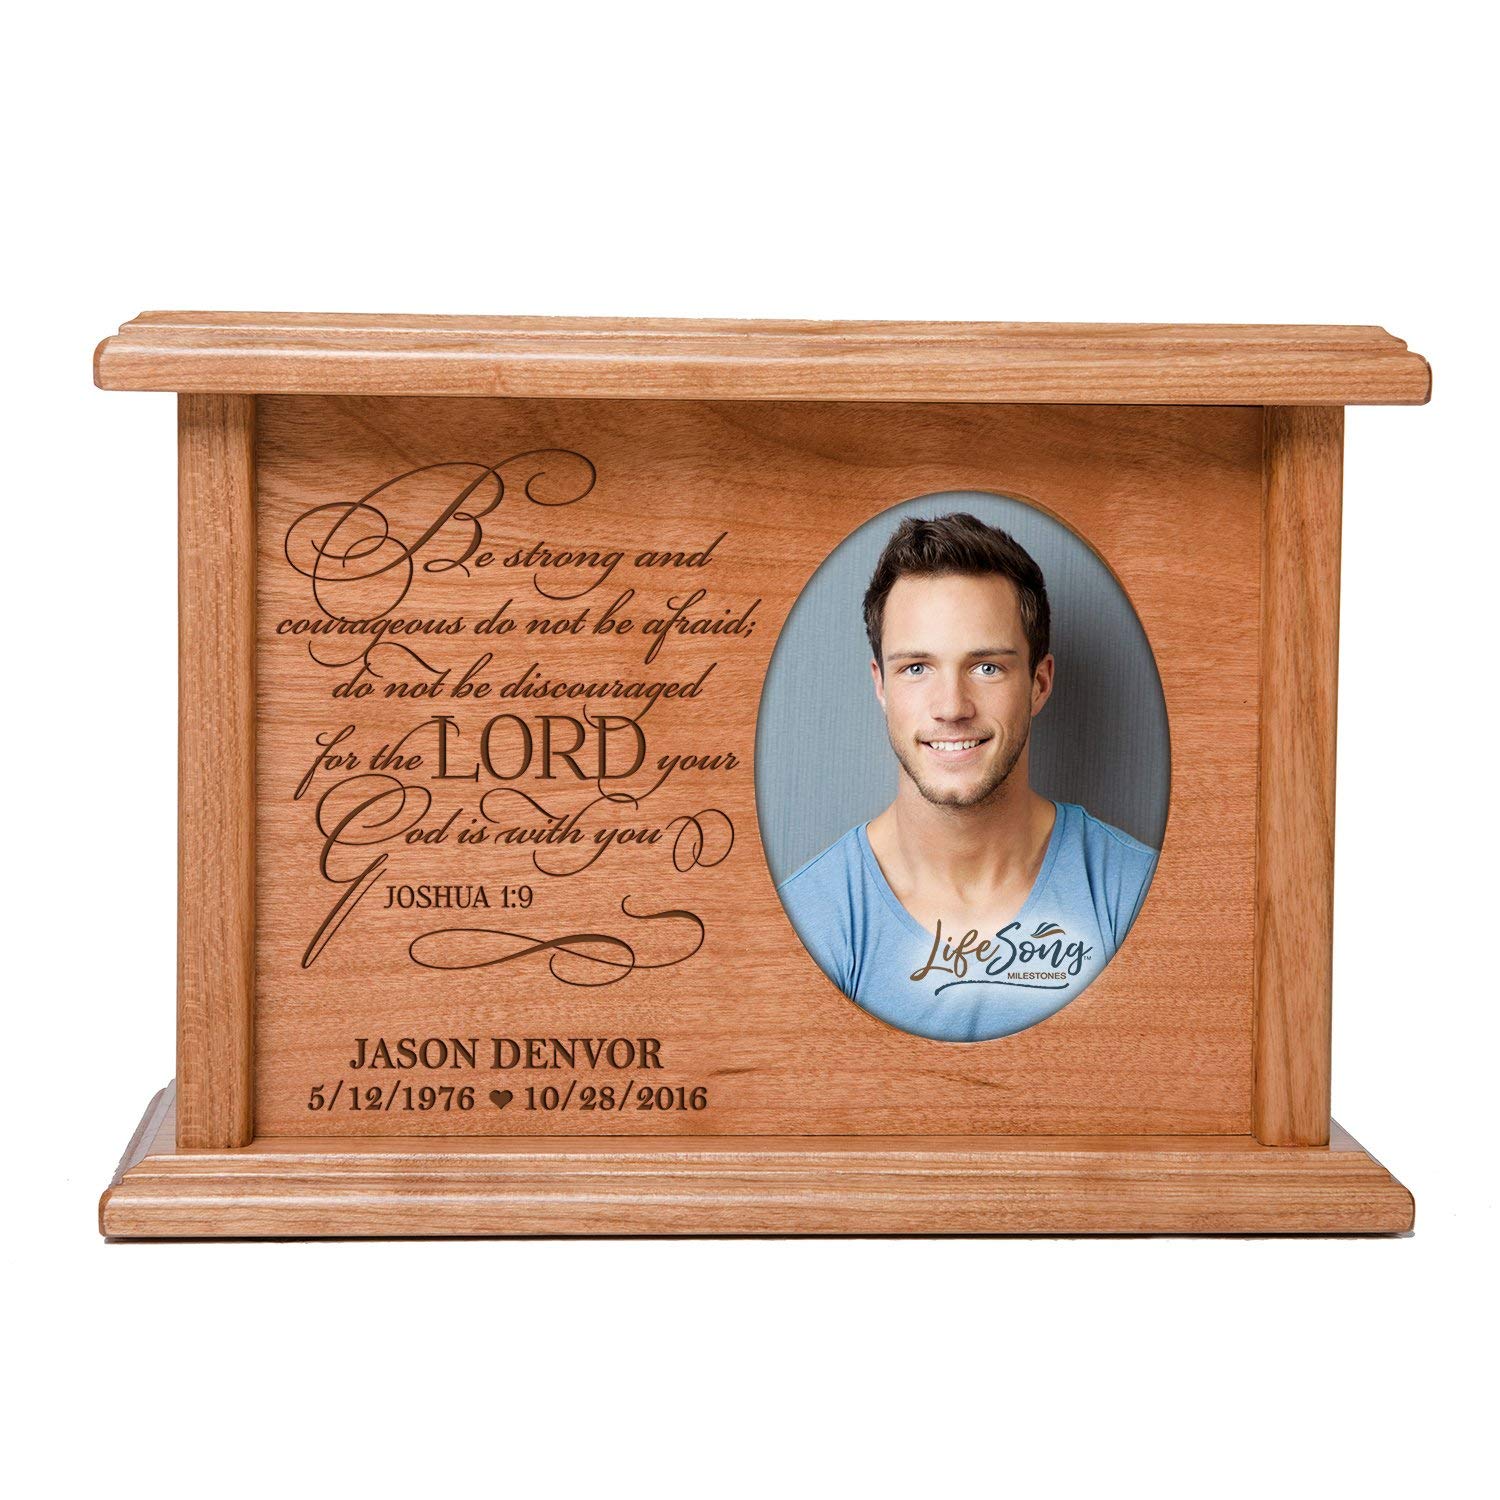 Custom Memorial Cremation Urn Box for Human Ashes holds 2x3 photo and holds 65 cu in Be Strong and Courageous